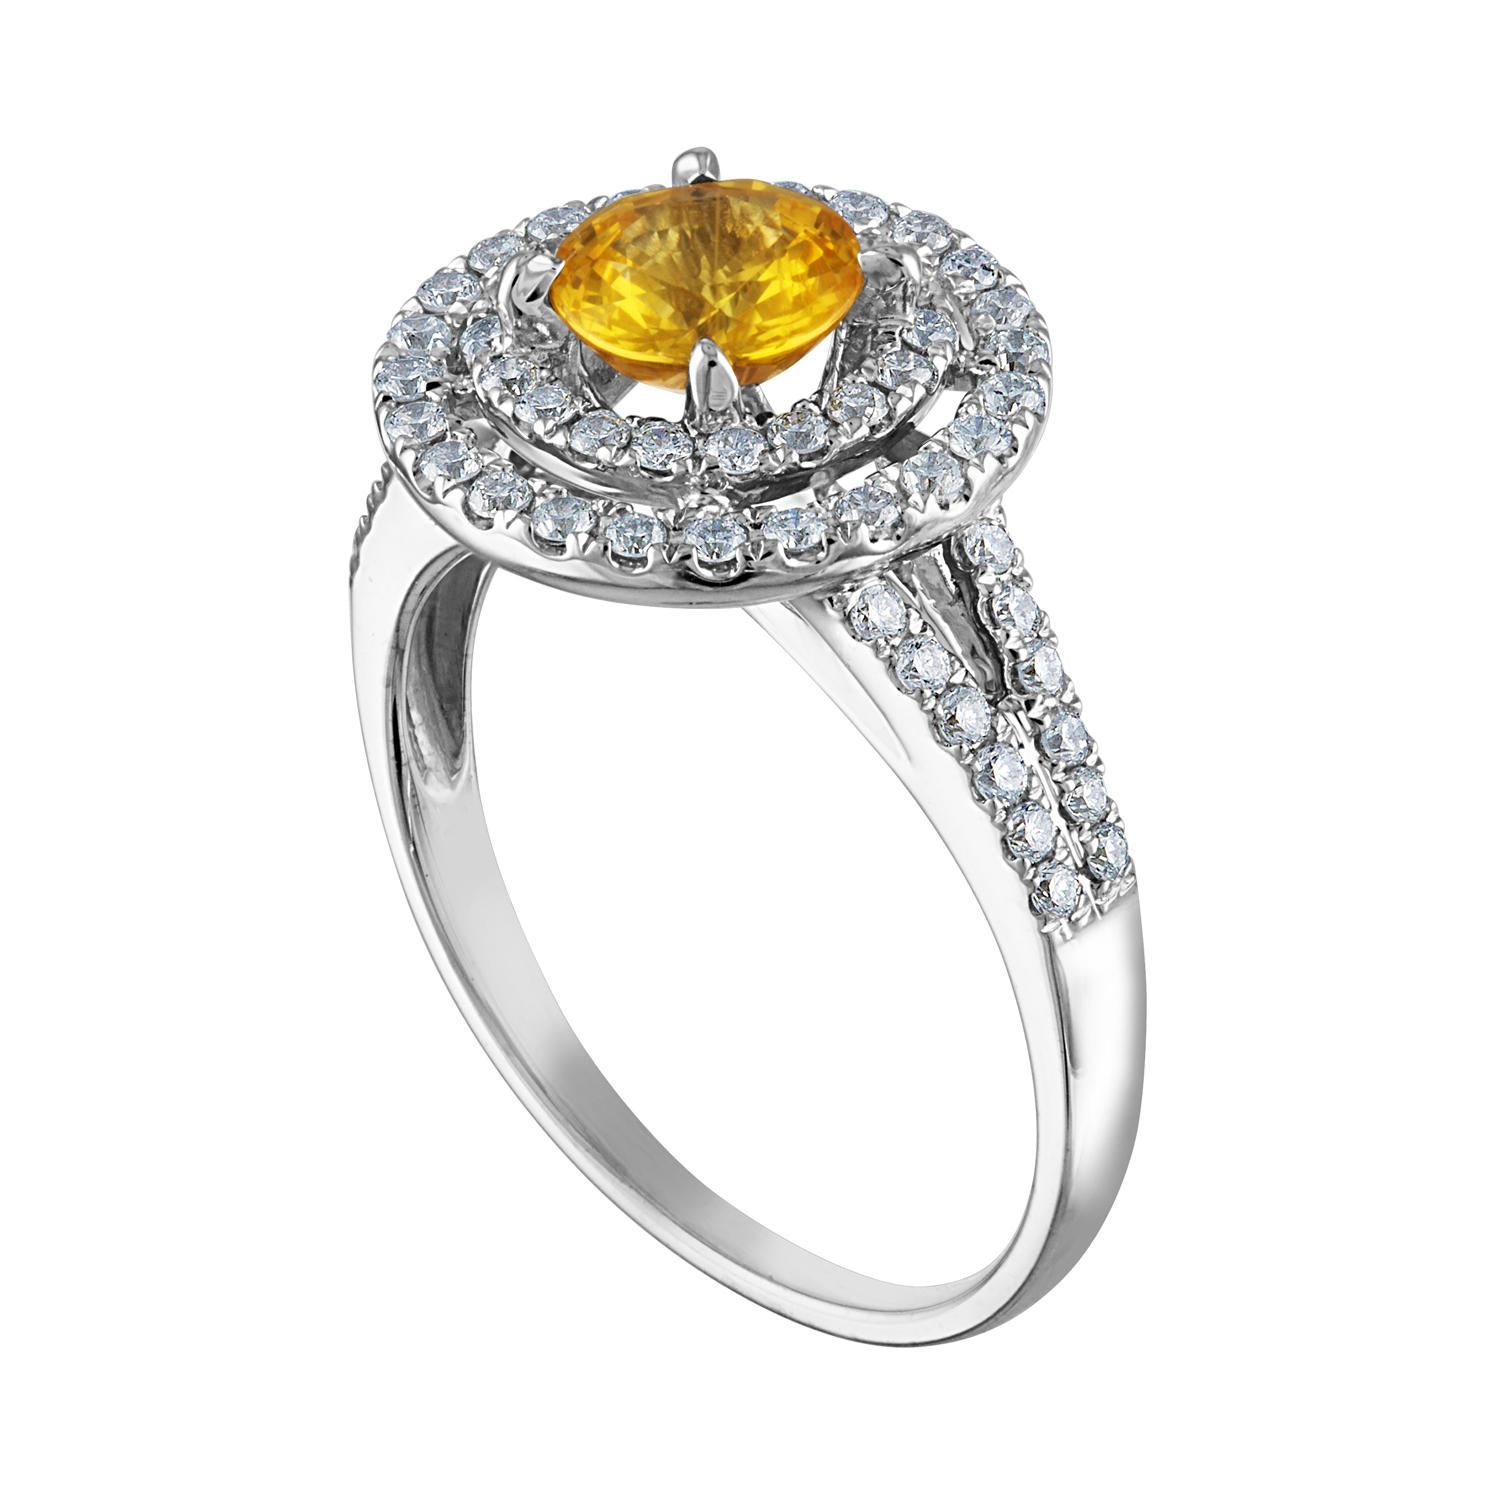 Beautiful Double Halo Ring
The ring is 14K White Gold
The Center Stone is a Round Yellow Sapphire 0.98 Carats
The Sapphire is AGL Certified Heated
There are 0.70 Carats in Diamonds F/G VS/SI
The ring is a size 6.5, sizable.
The ring weighs 4.0 grams